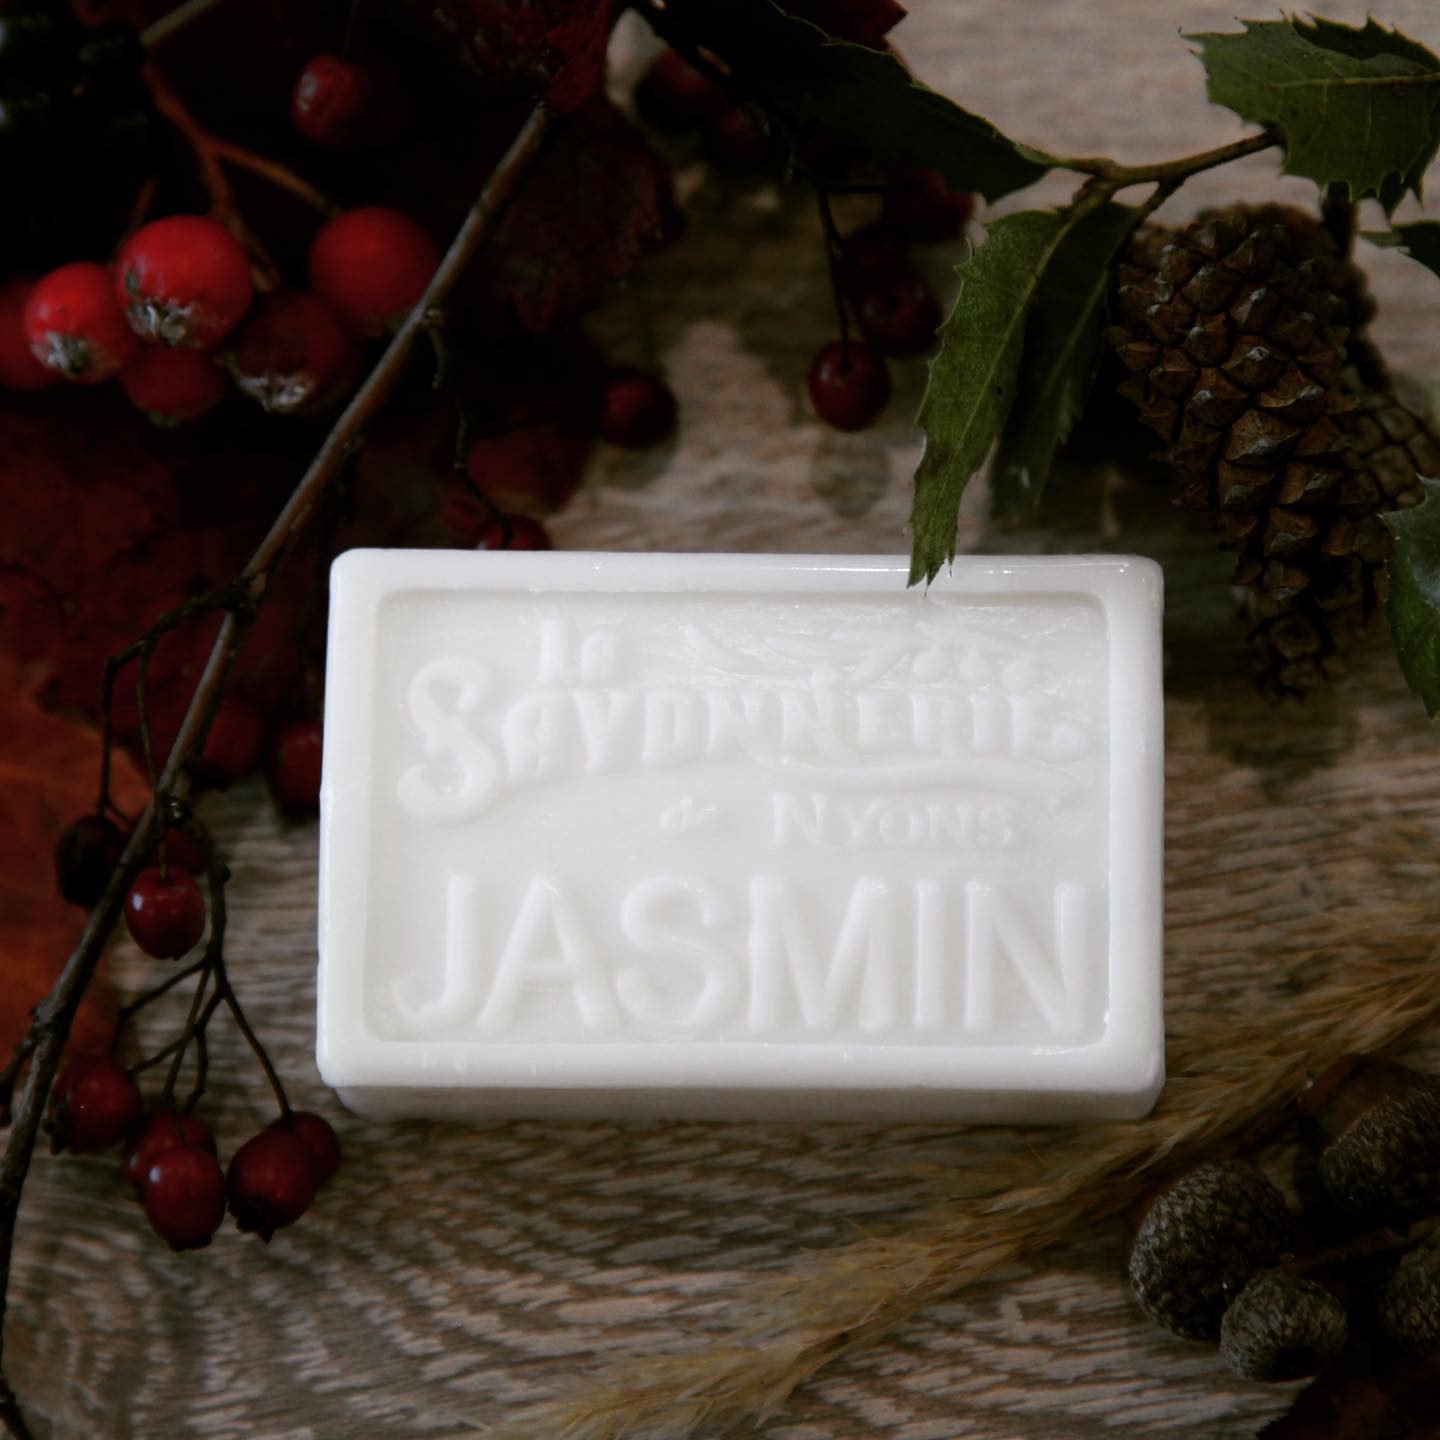 White bar of soap with stamp reading La Savonnerie de Syons Jasmin surrounded by holly berries and pinecones.